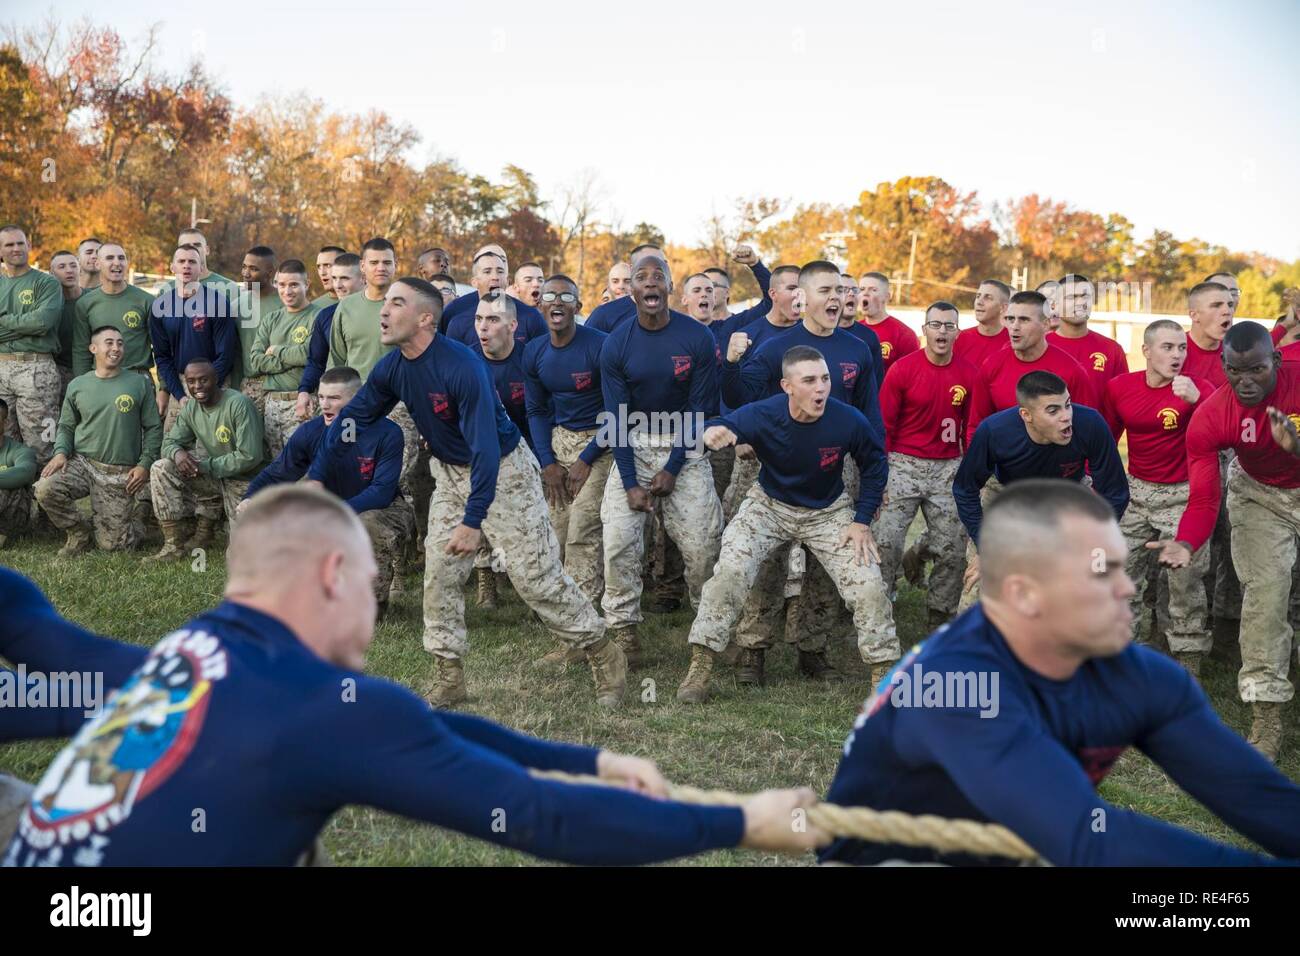 U.S. Marines with the Officer Candidate School (OCS) cheer on their teammates in a tug-o-war field meet event at OCS, Marine Corps Base Quantico, Va., Nov. 17, 2016. The purpose of the meet was to promote camaraderie and espirit de corps. Stock Photo